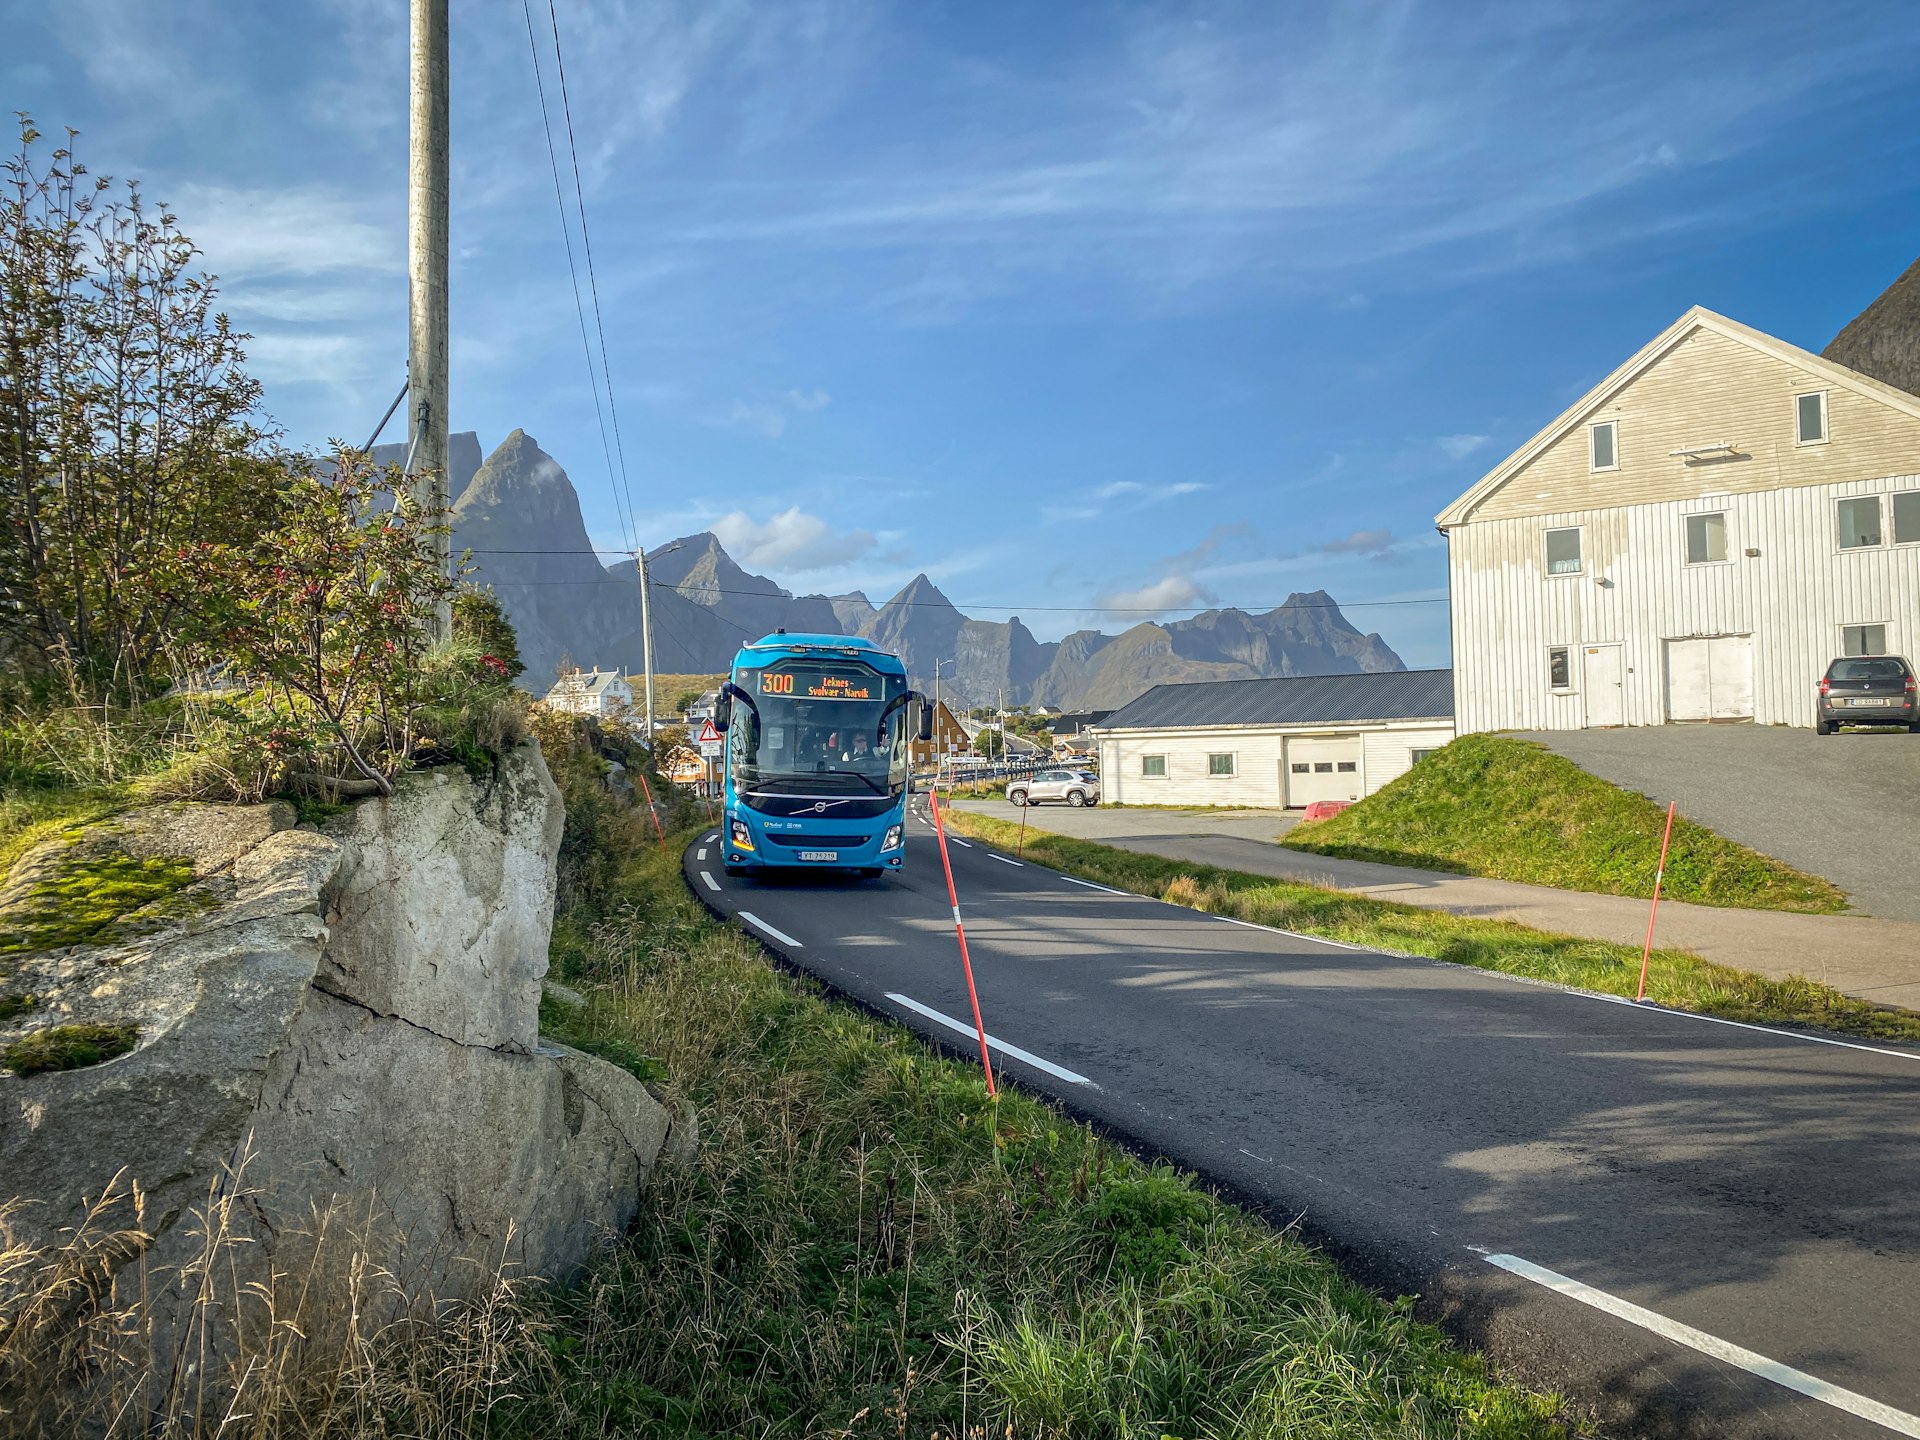 A bus passes through a lush village in Norway